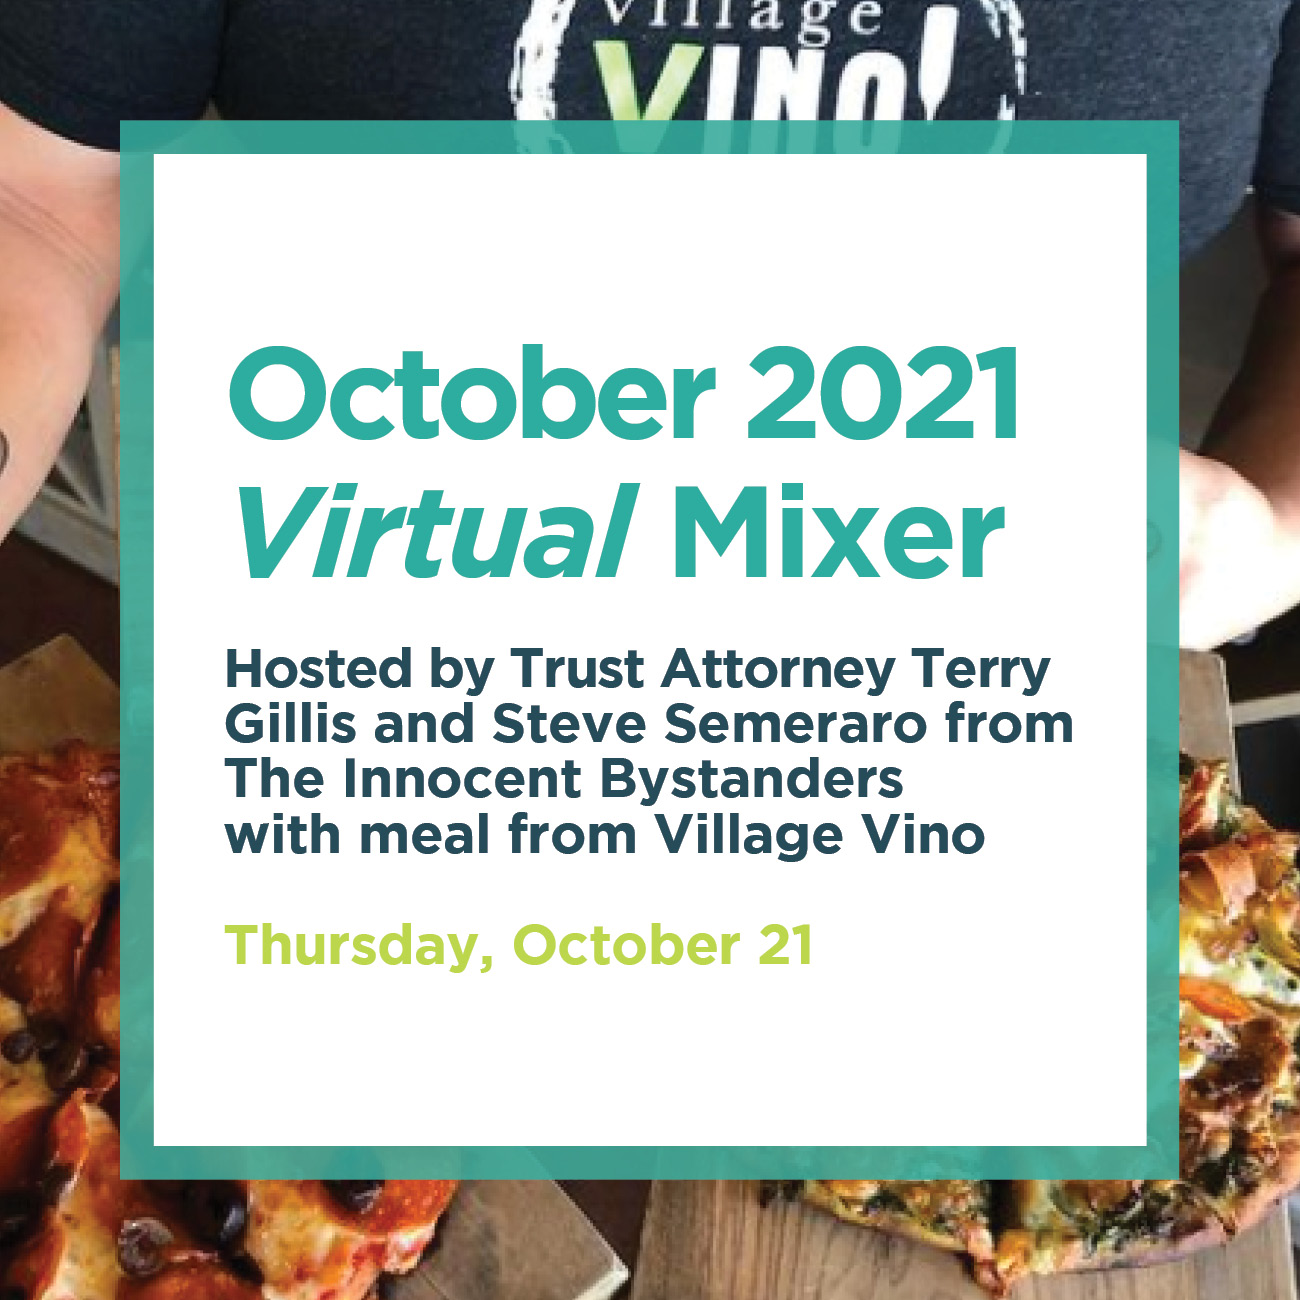 October 2021 Virtual Mixer Hosted By Trust Attorney Terry Gillis and Steve Semeraro of The Innocent Bystanders Thursday, October 21